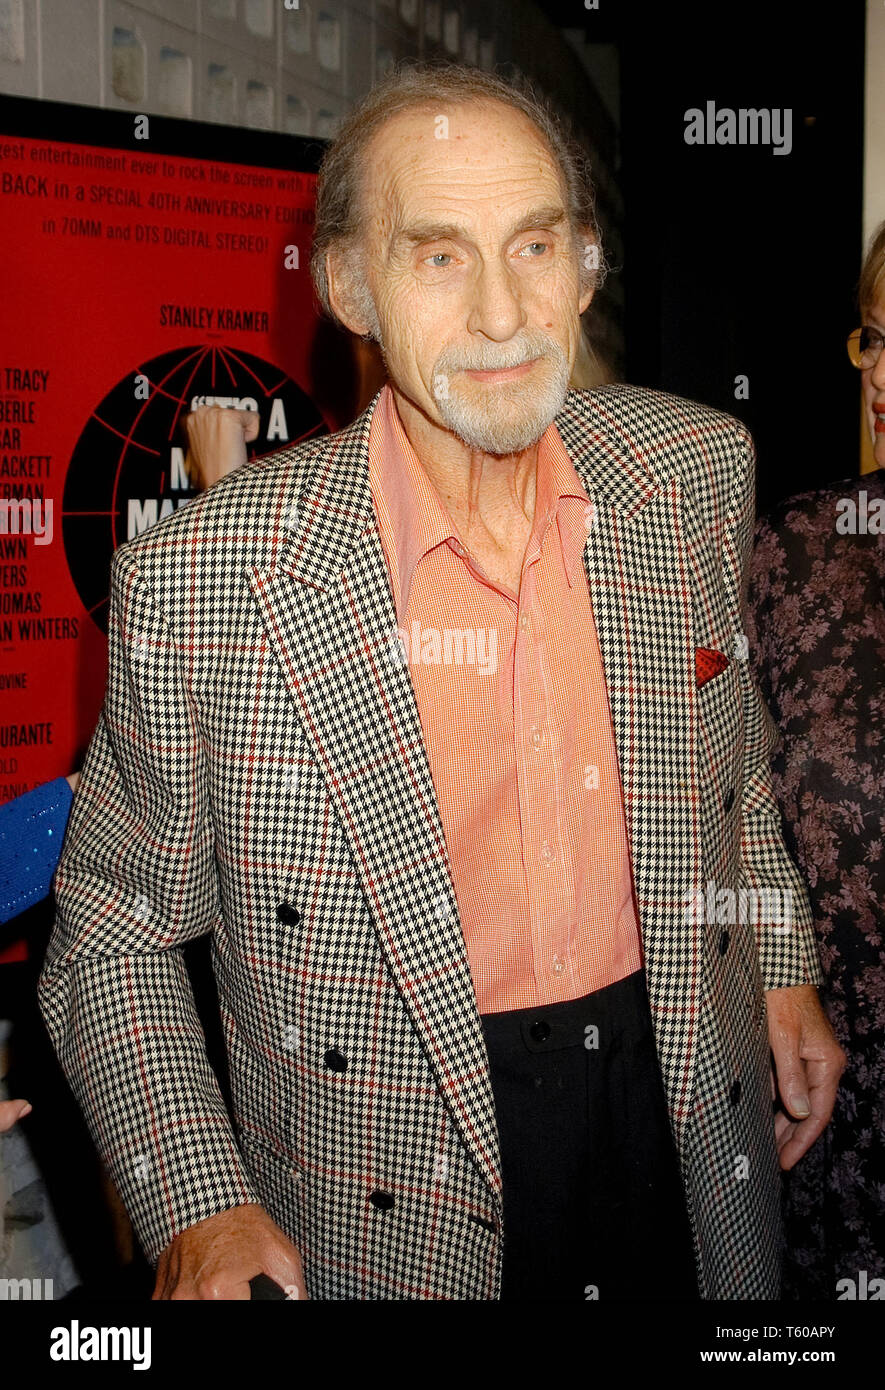 Sid Caesar at the 40th Anniversary of Stanley Kramer's 'It's A Mad, Mad, Mad Mad World' and 40th Anniversary of Arclight Hollywood's Cinerama Dome  at the Arclight Hollywoods Cinerama Dome Theater in Hollywood, CA. The event took place on Thursday, October 16, 2003. Photo by: SBM / PictureLux  File Reference # 33790 1080SBMPLX Stock Photo